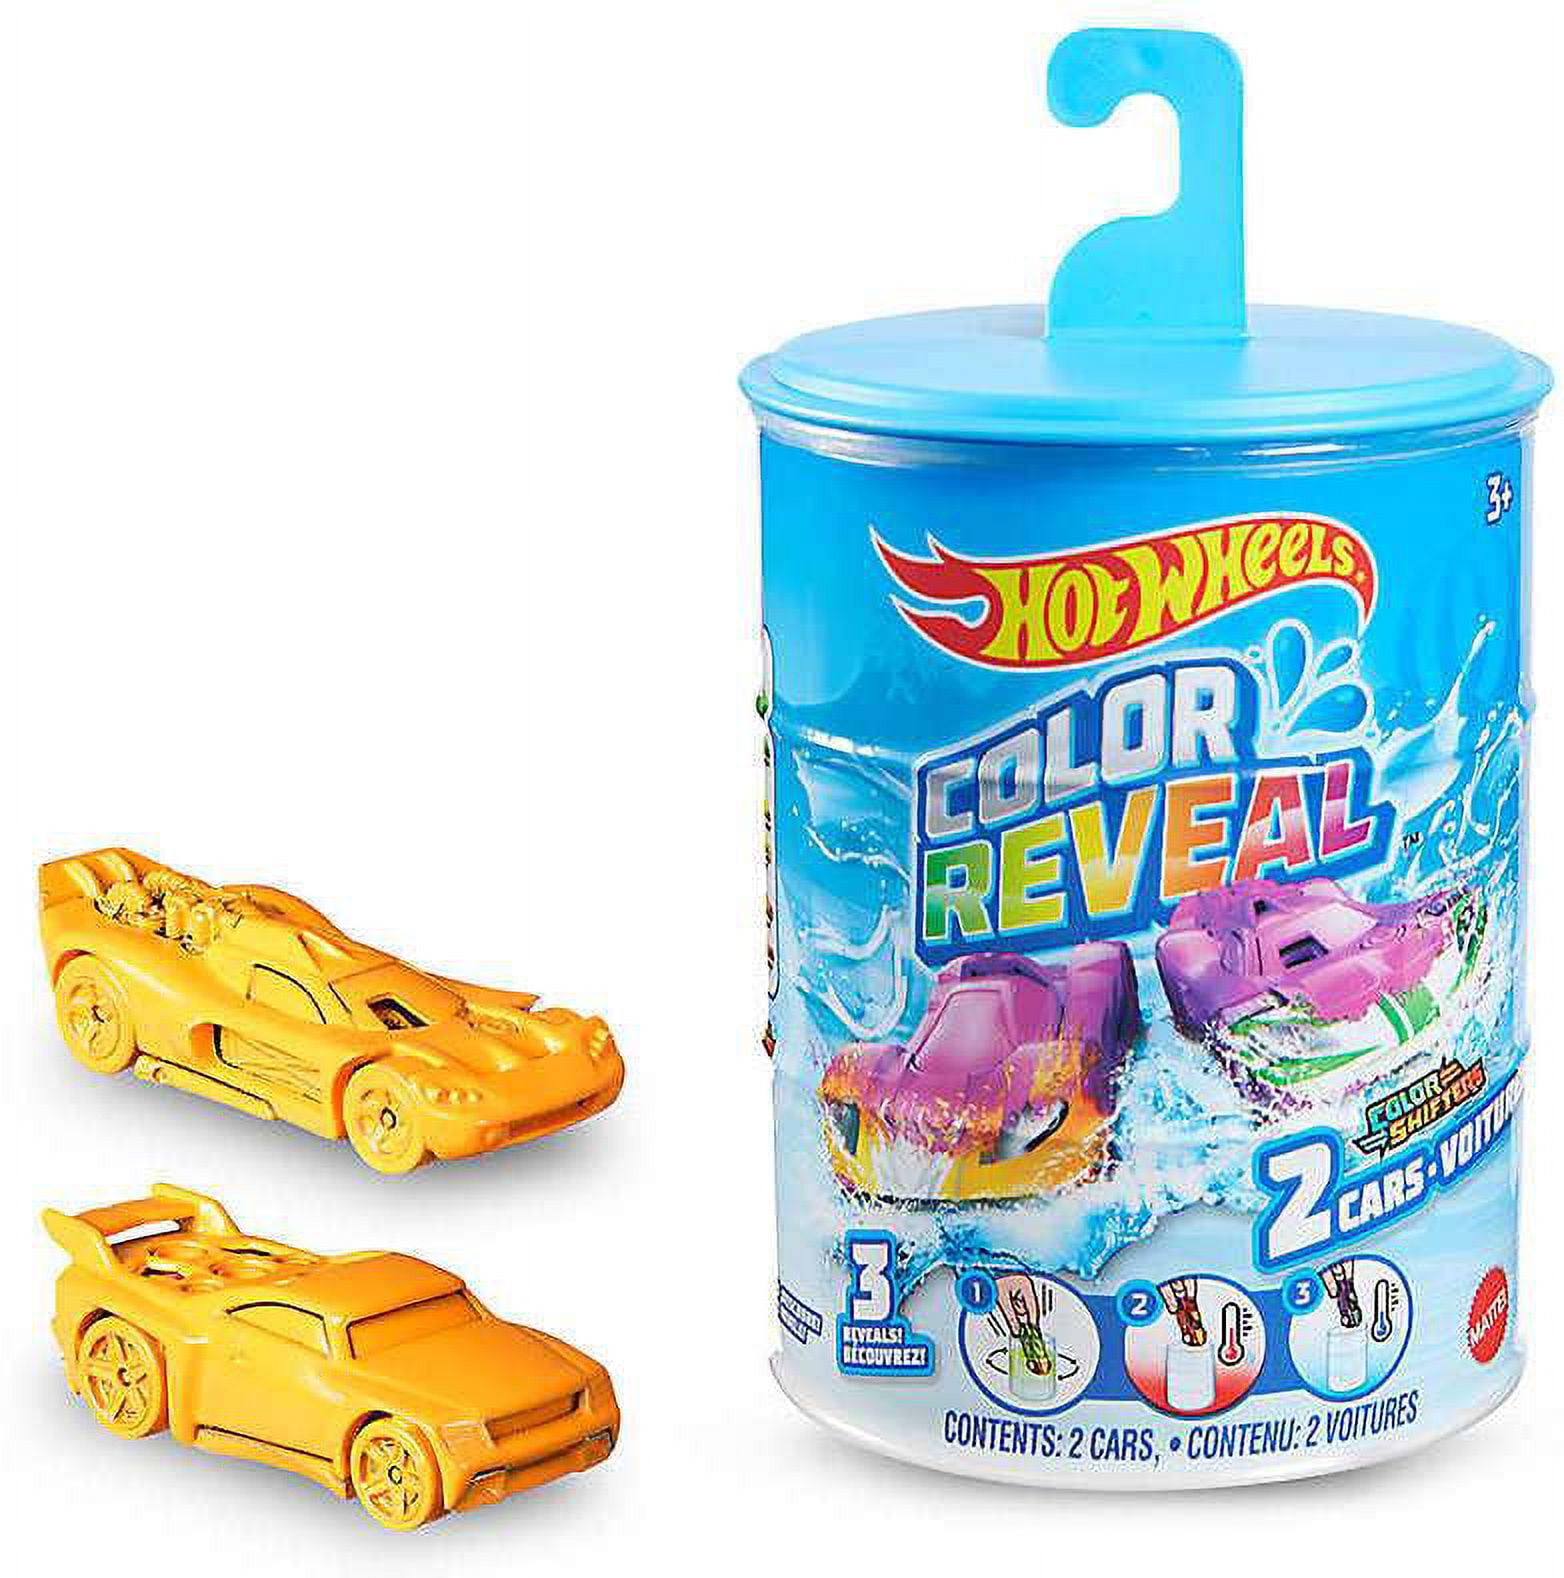 Hot Wheels Color Shifters Collection - The Toy Box Hanover